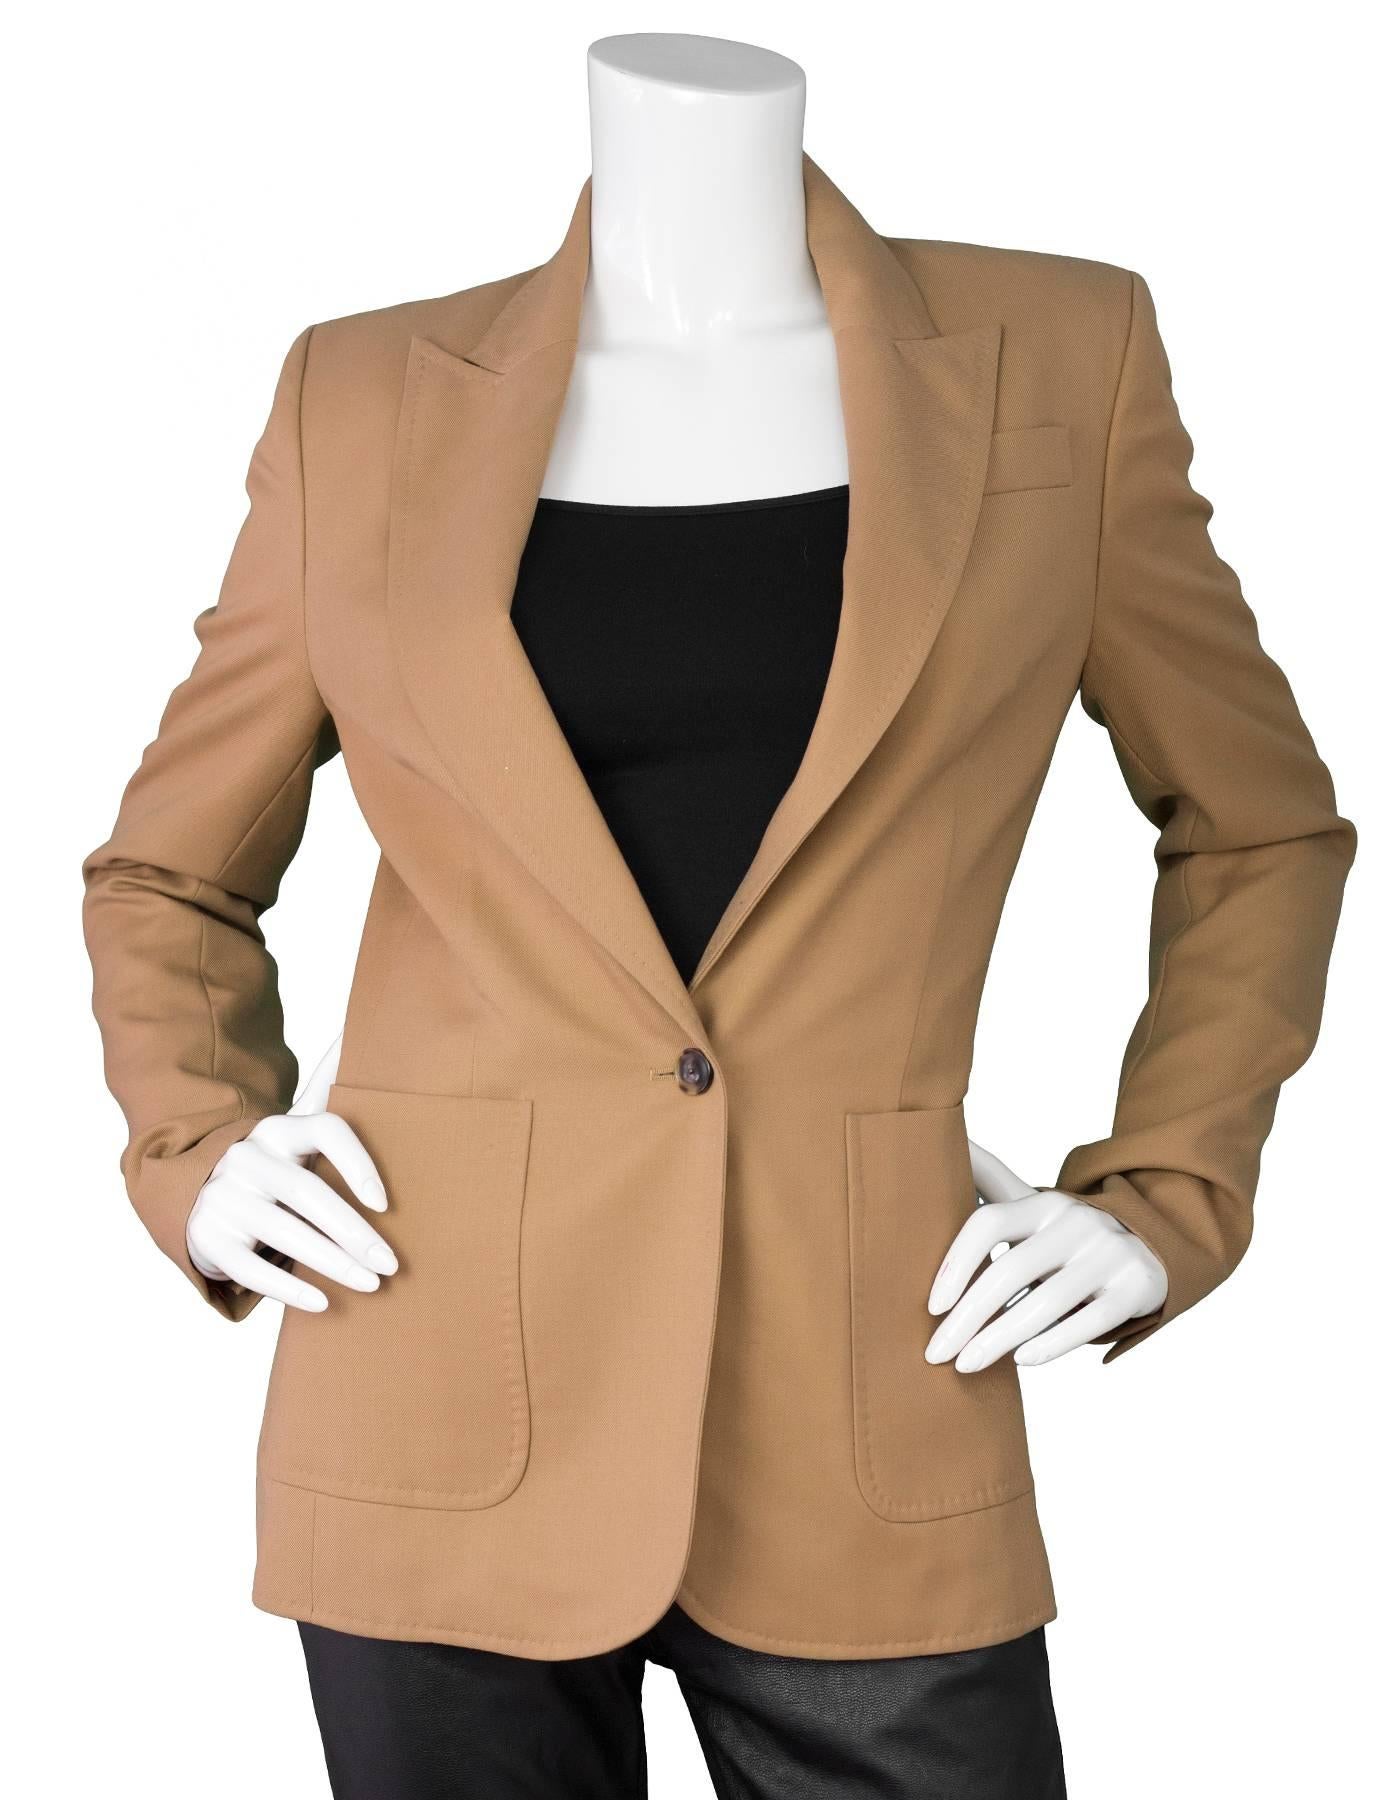 Veronique Branquinho Camel Wool Blazer Sz IT40
Features notch lapels

Made In: Italy
Color: Camel
Composition: 100% virgin wool
Lining: Orange textile
Closure/Opening: Button closure
Exterior Pockets: Patch pockets
Interior Pockets: None
Overall